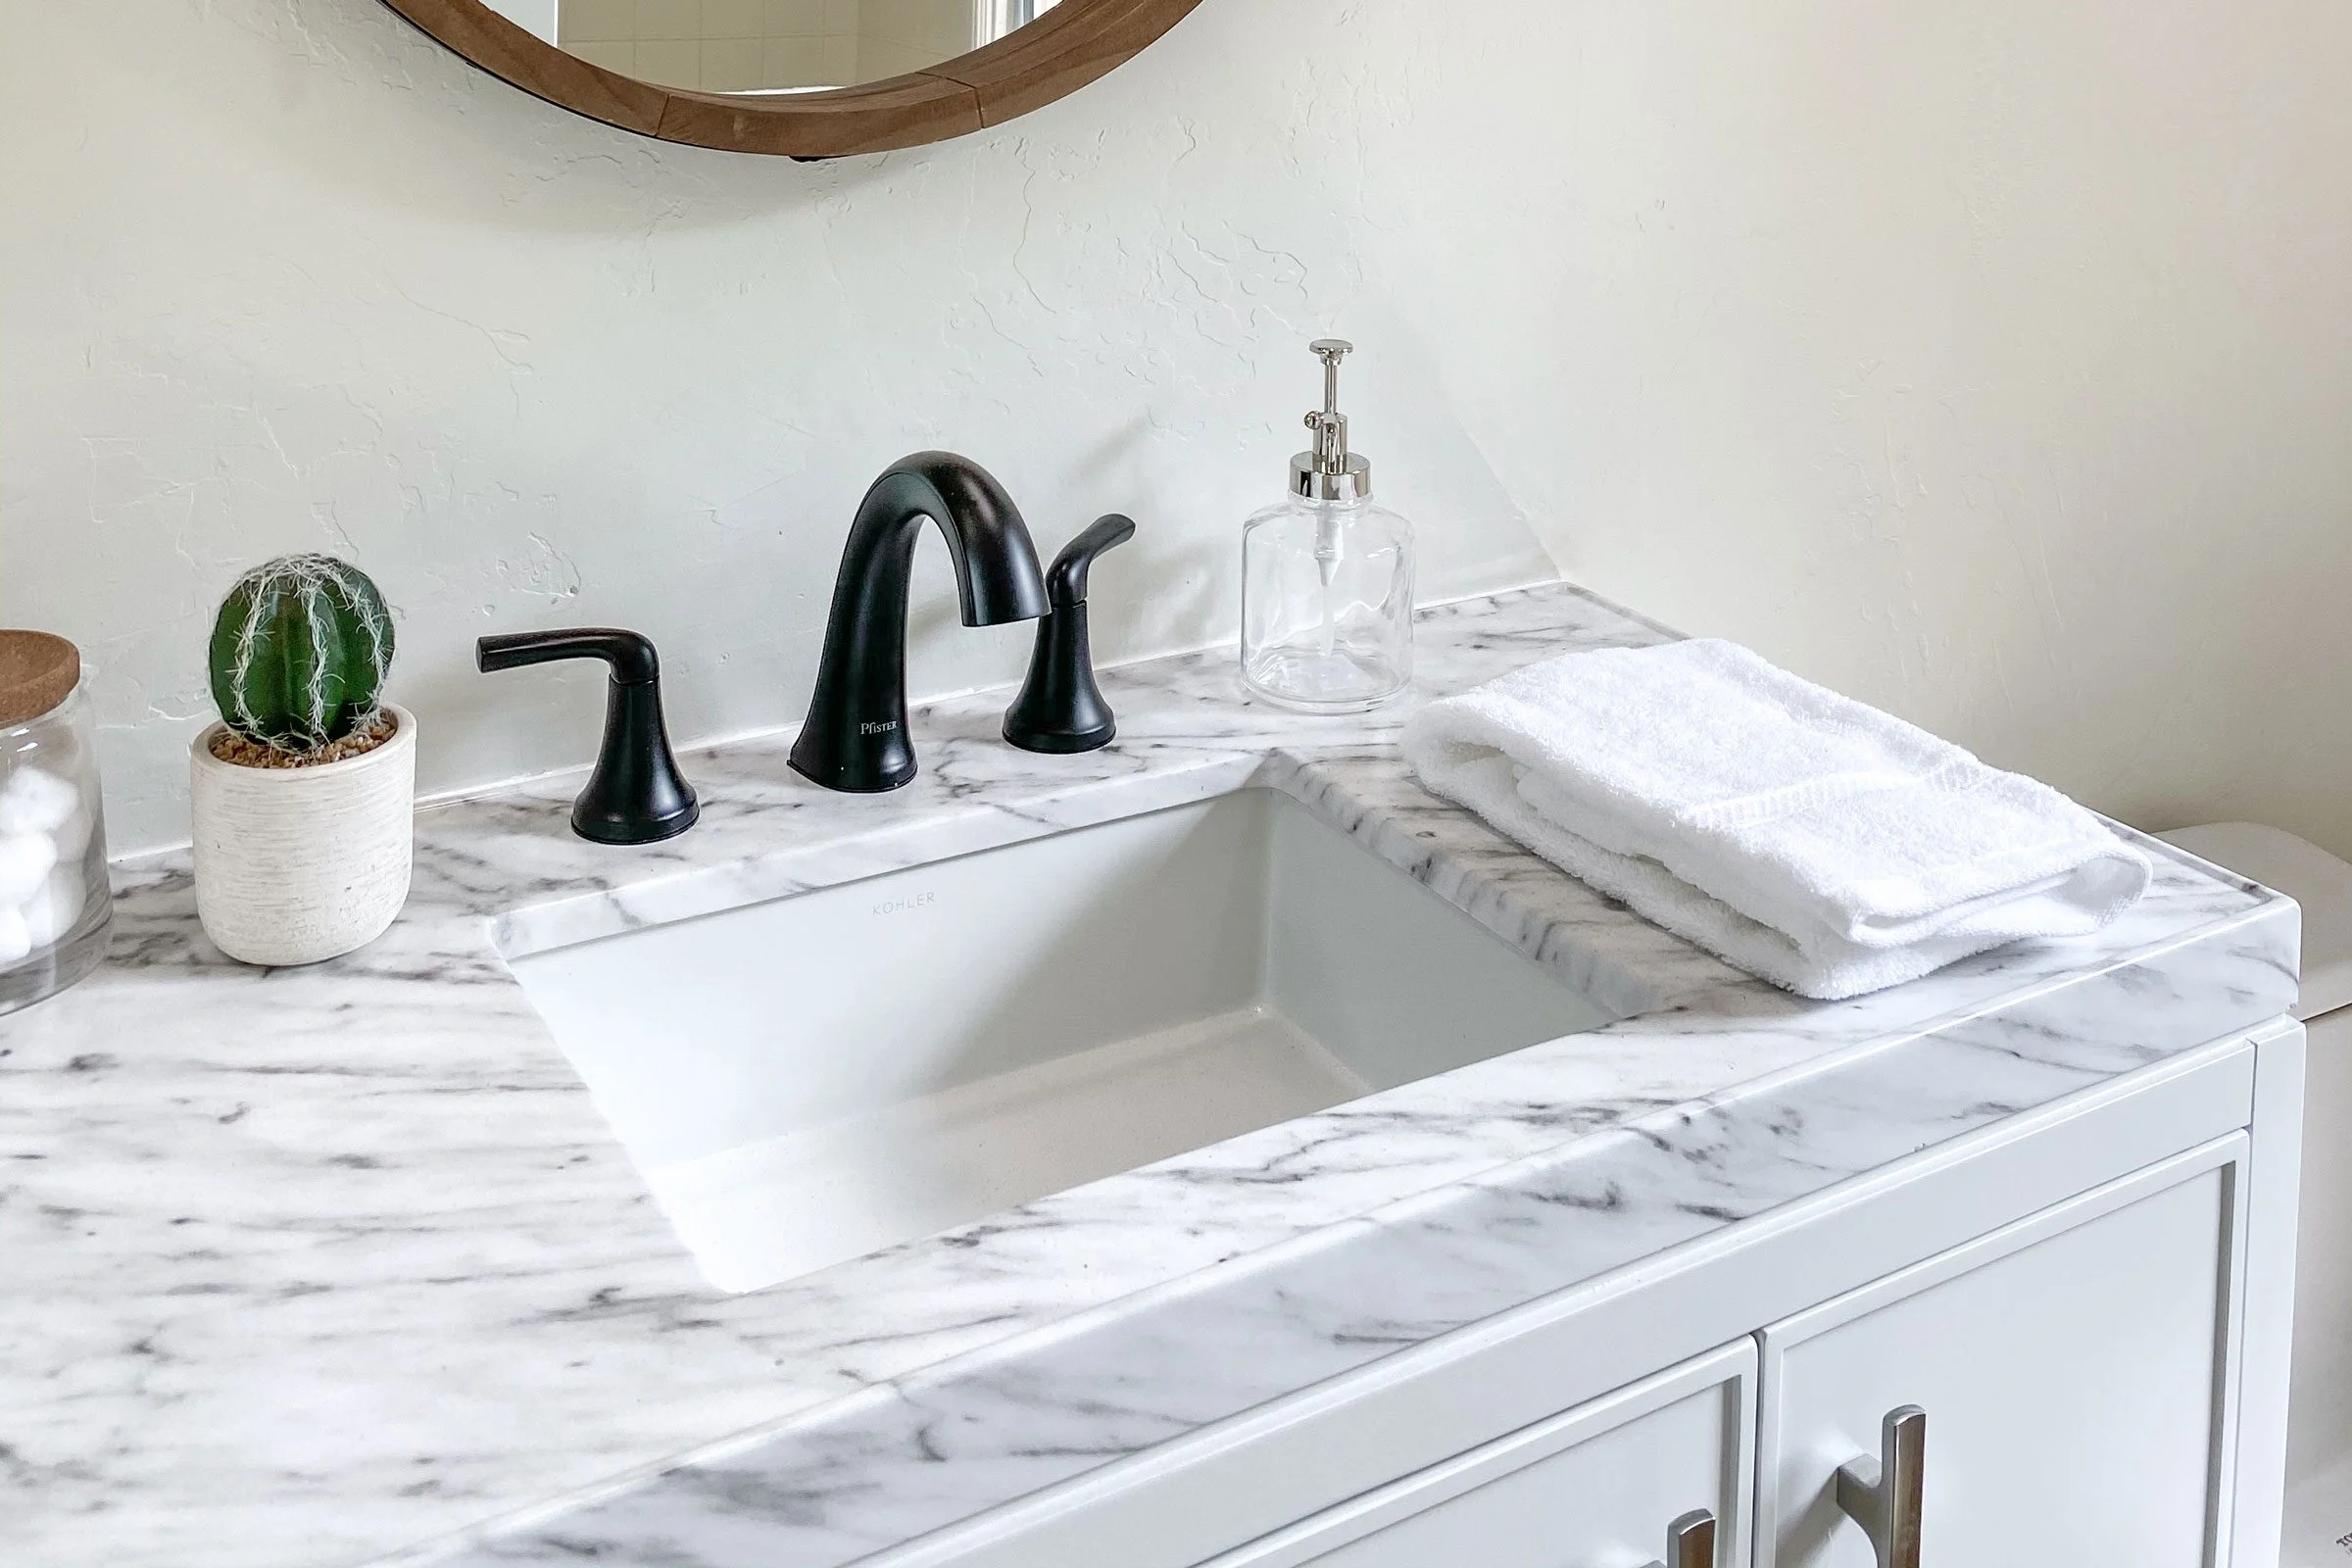 How to Clean a Bathroom Countertop